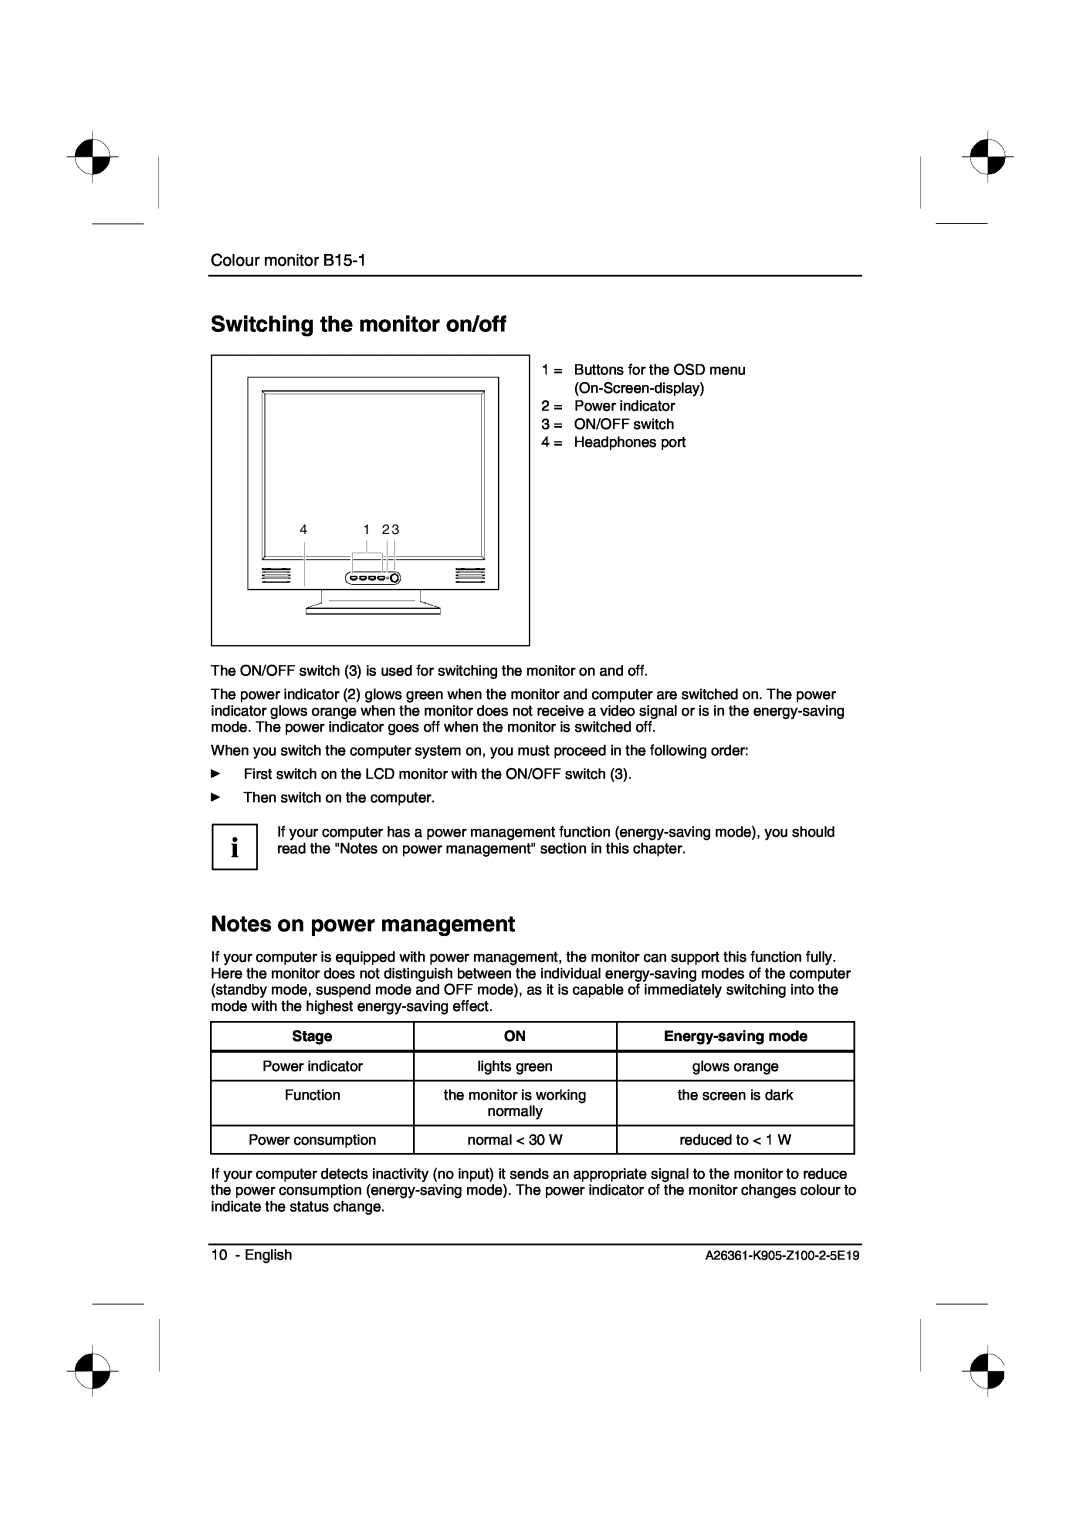 Fujitsu Siemens Computers B15-1 manual Switching the monitor on/off, Notes on power management, Stage, Energy-saving mode 